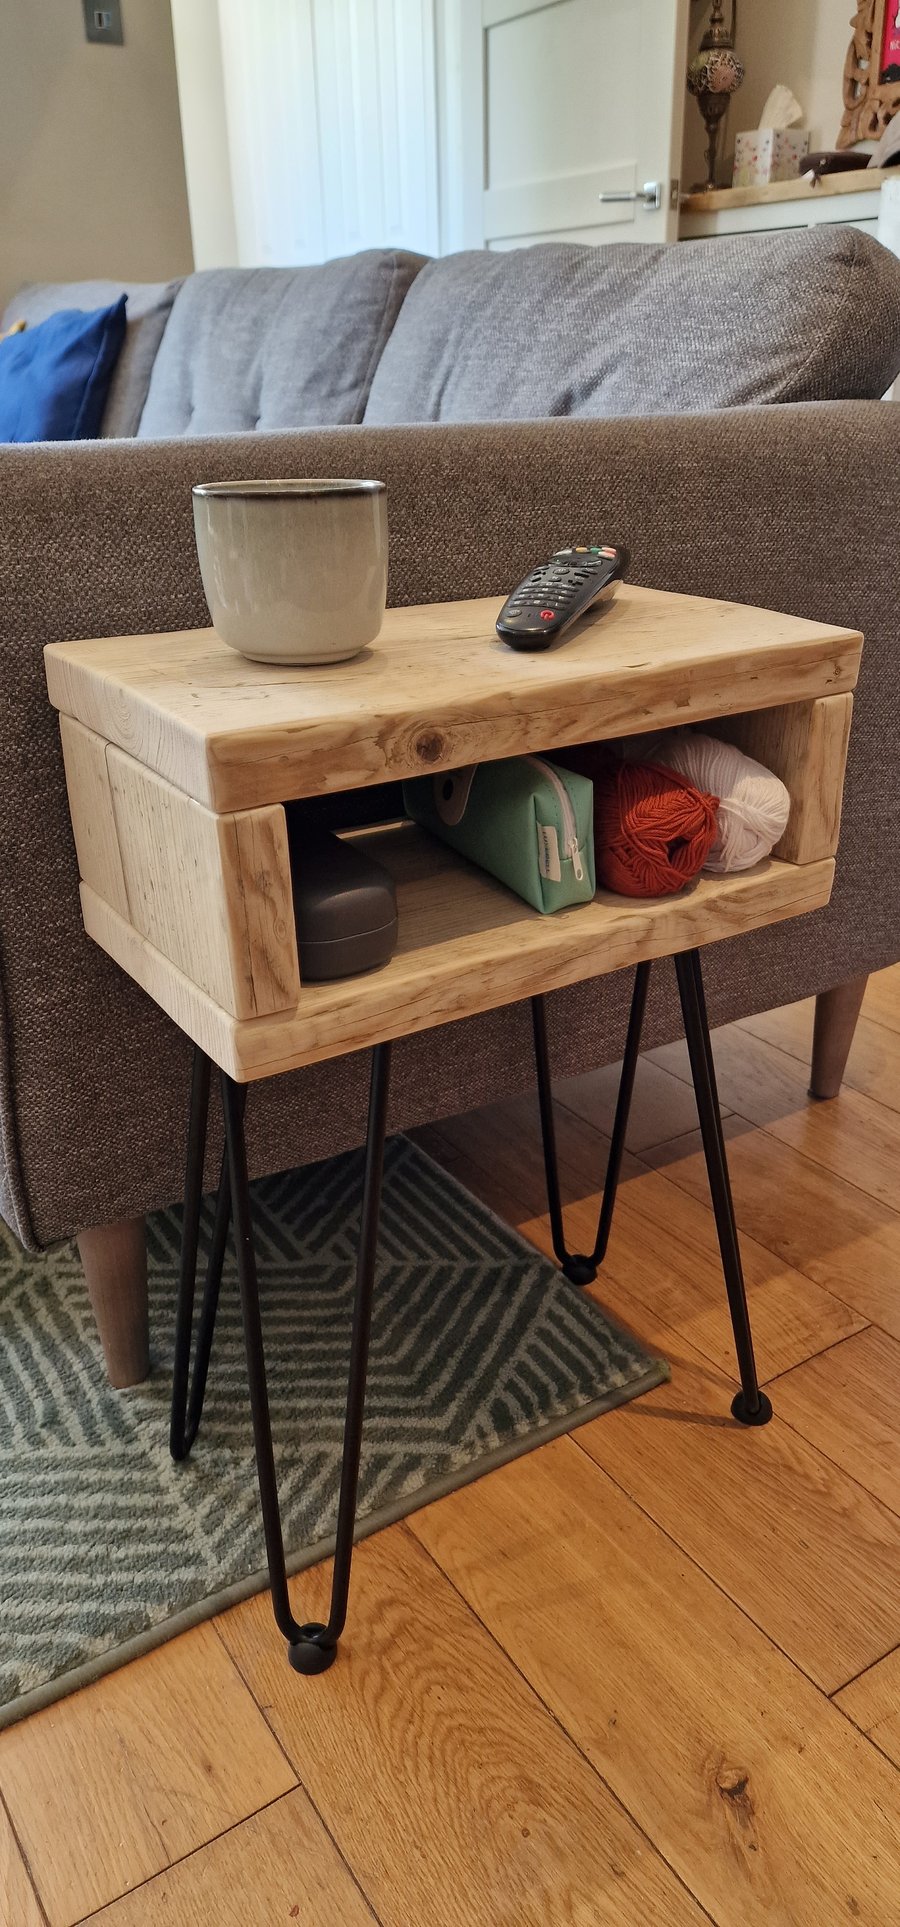 End Table - Sofa End Table - Side Table - Coffee Table